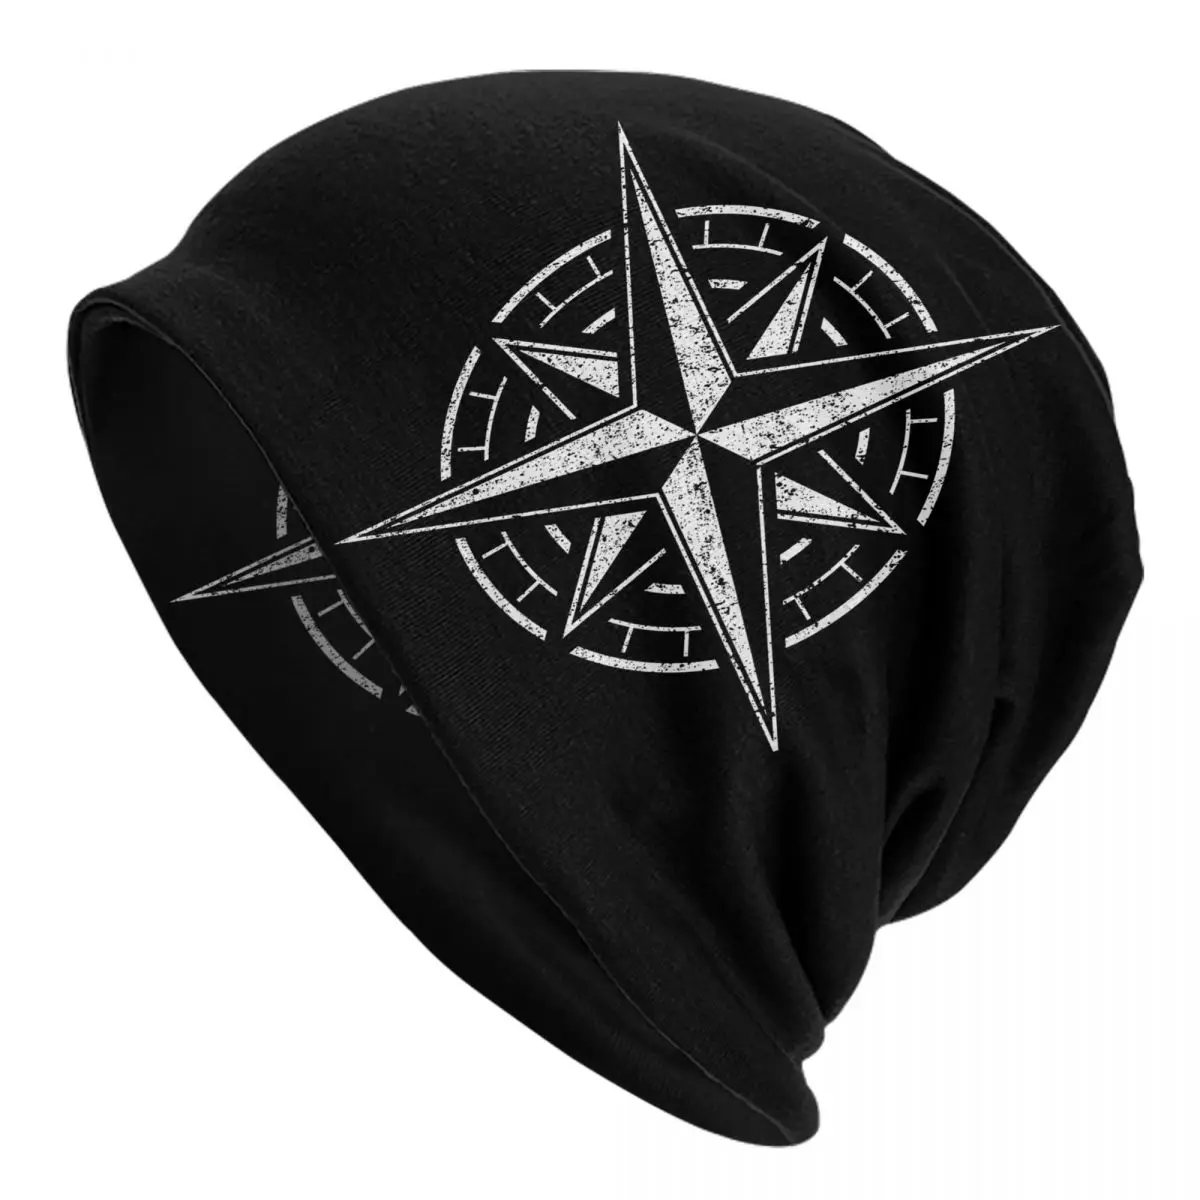 Compass Rose With Grunge Effect Adult Men's Women's Knit Hat Keep warm winter Funny knitted hat